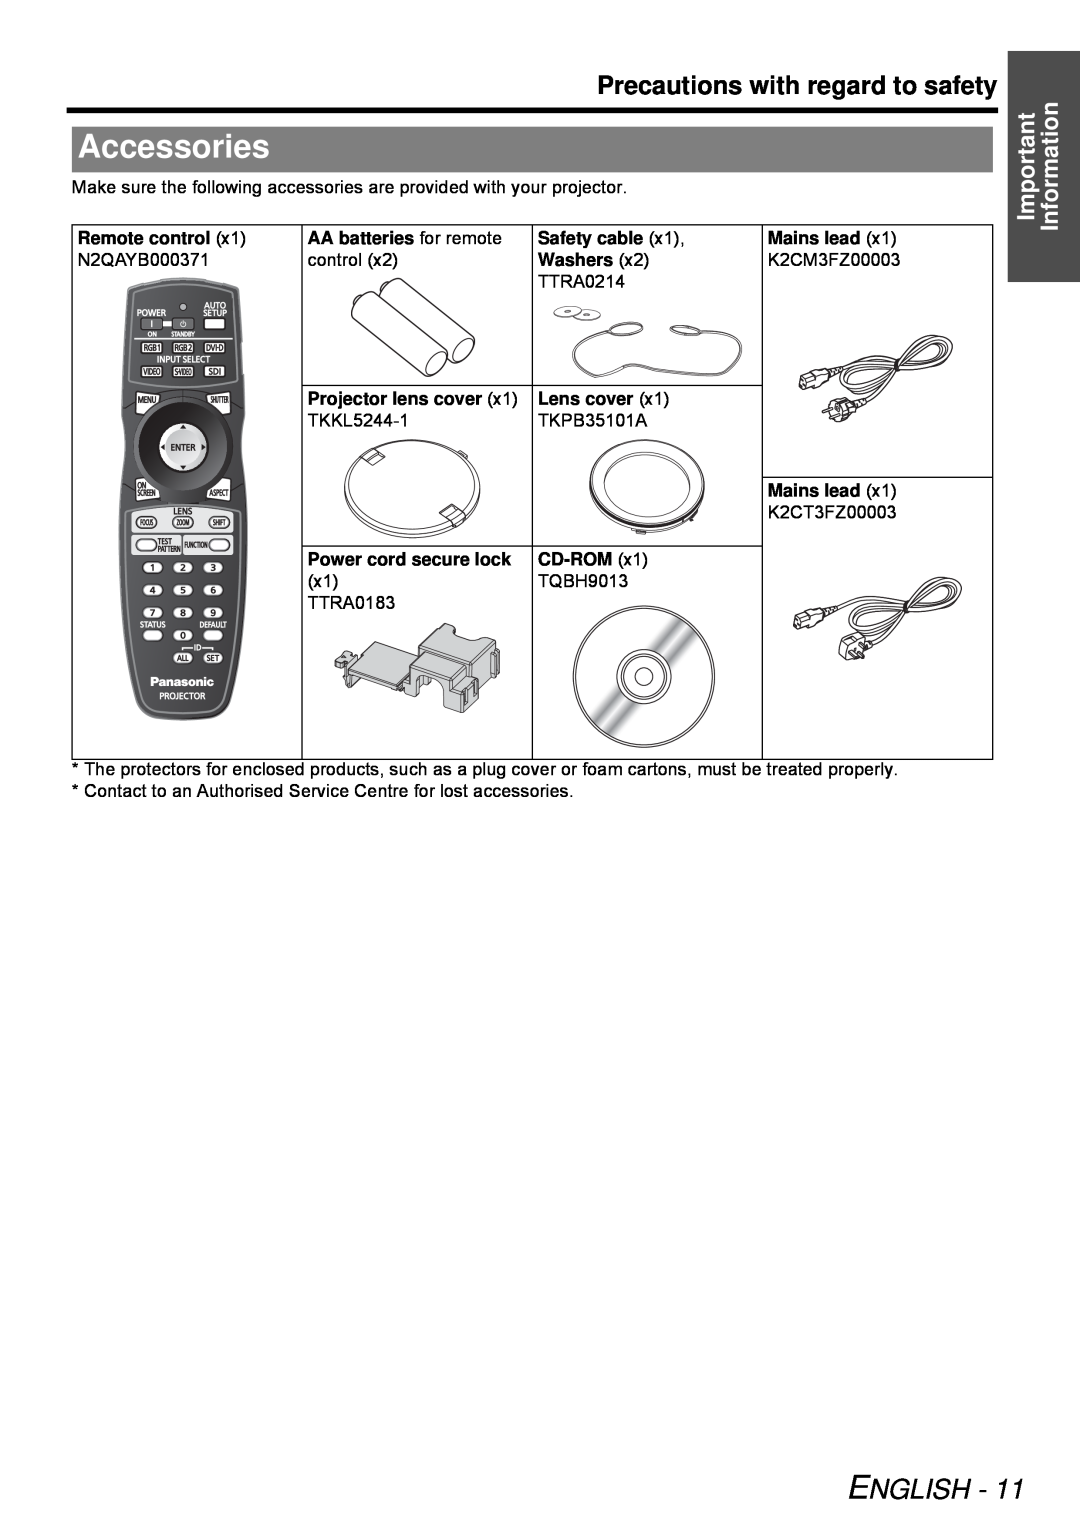 Panasonic PT-DW6300E Accessories, English, Precautions with regard to safety, Important Information, Washers, Lens cover 